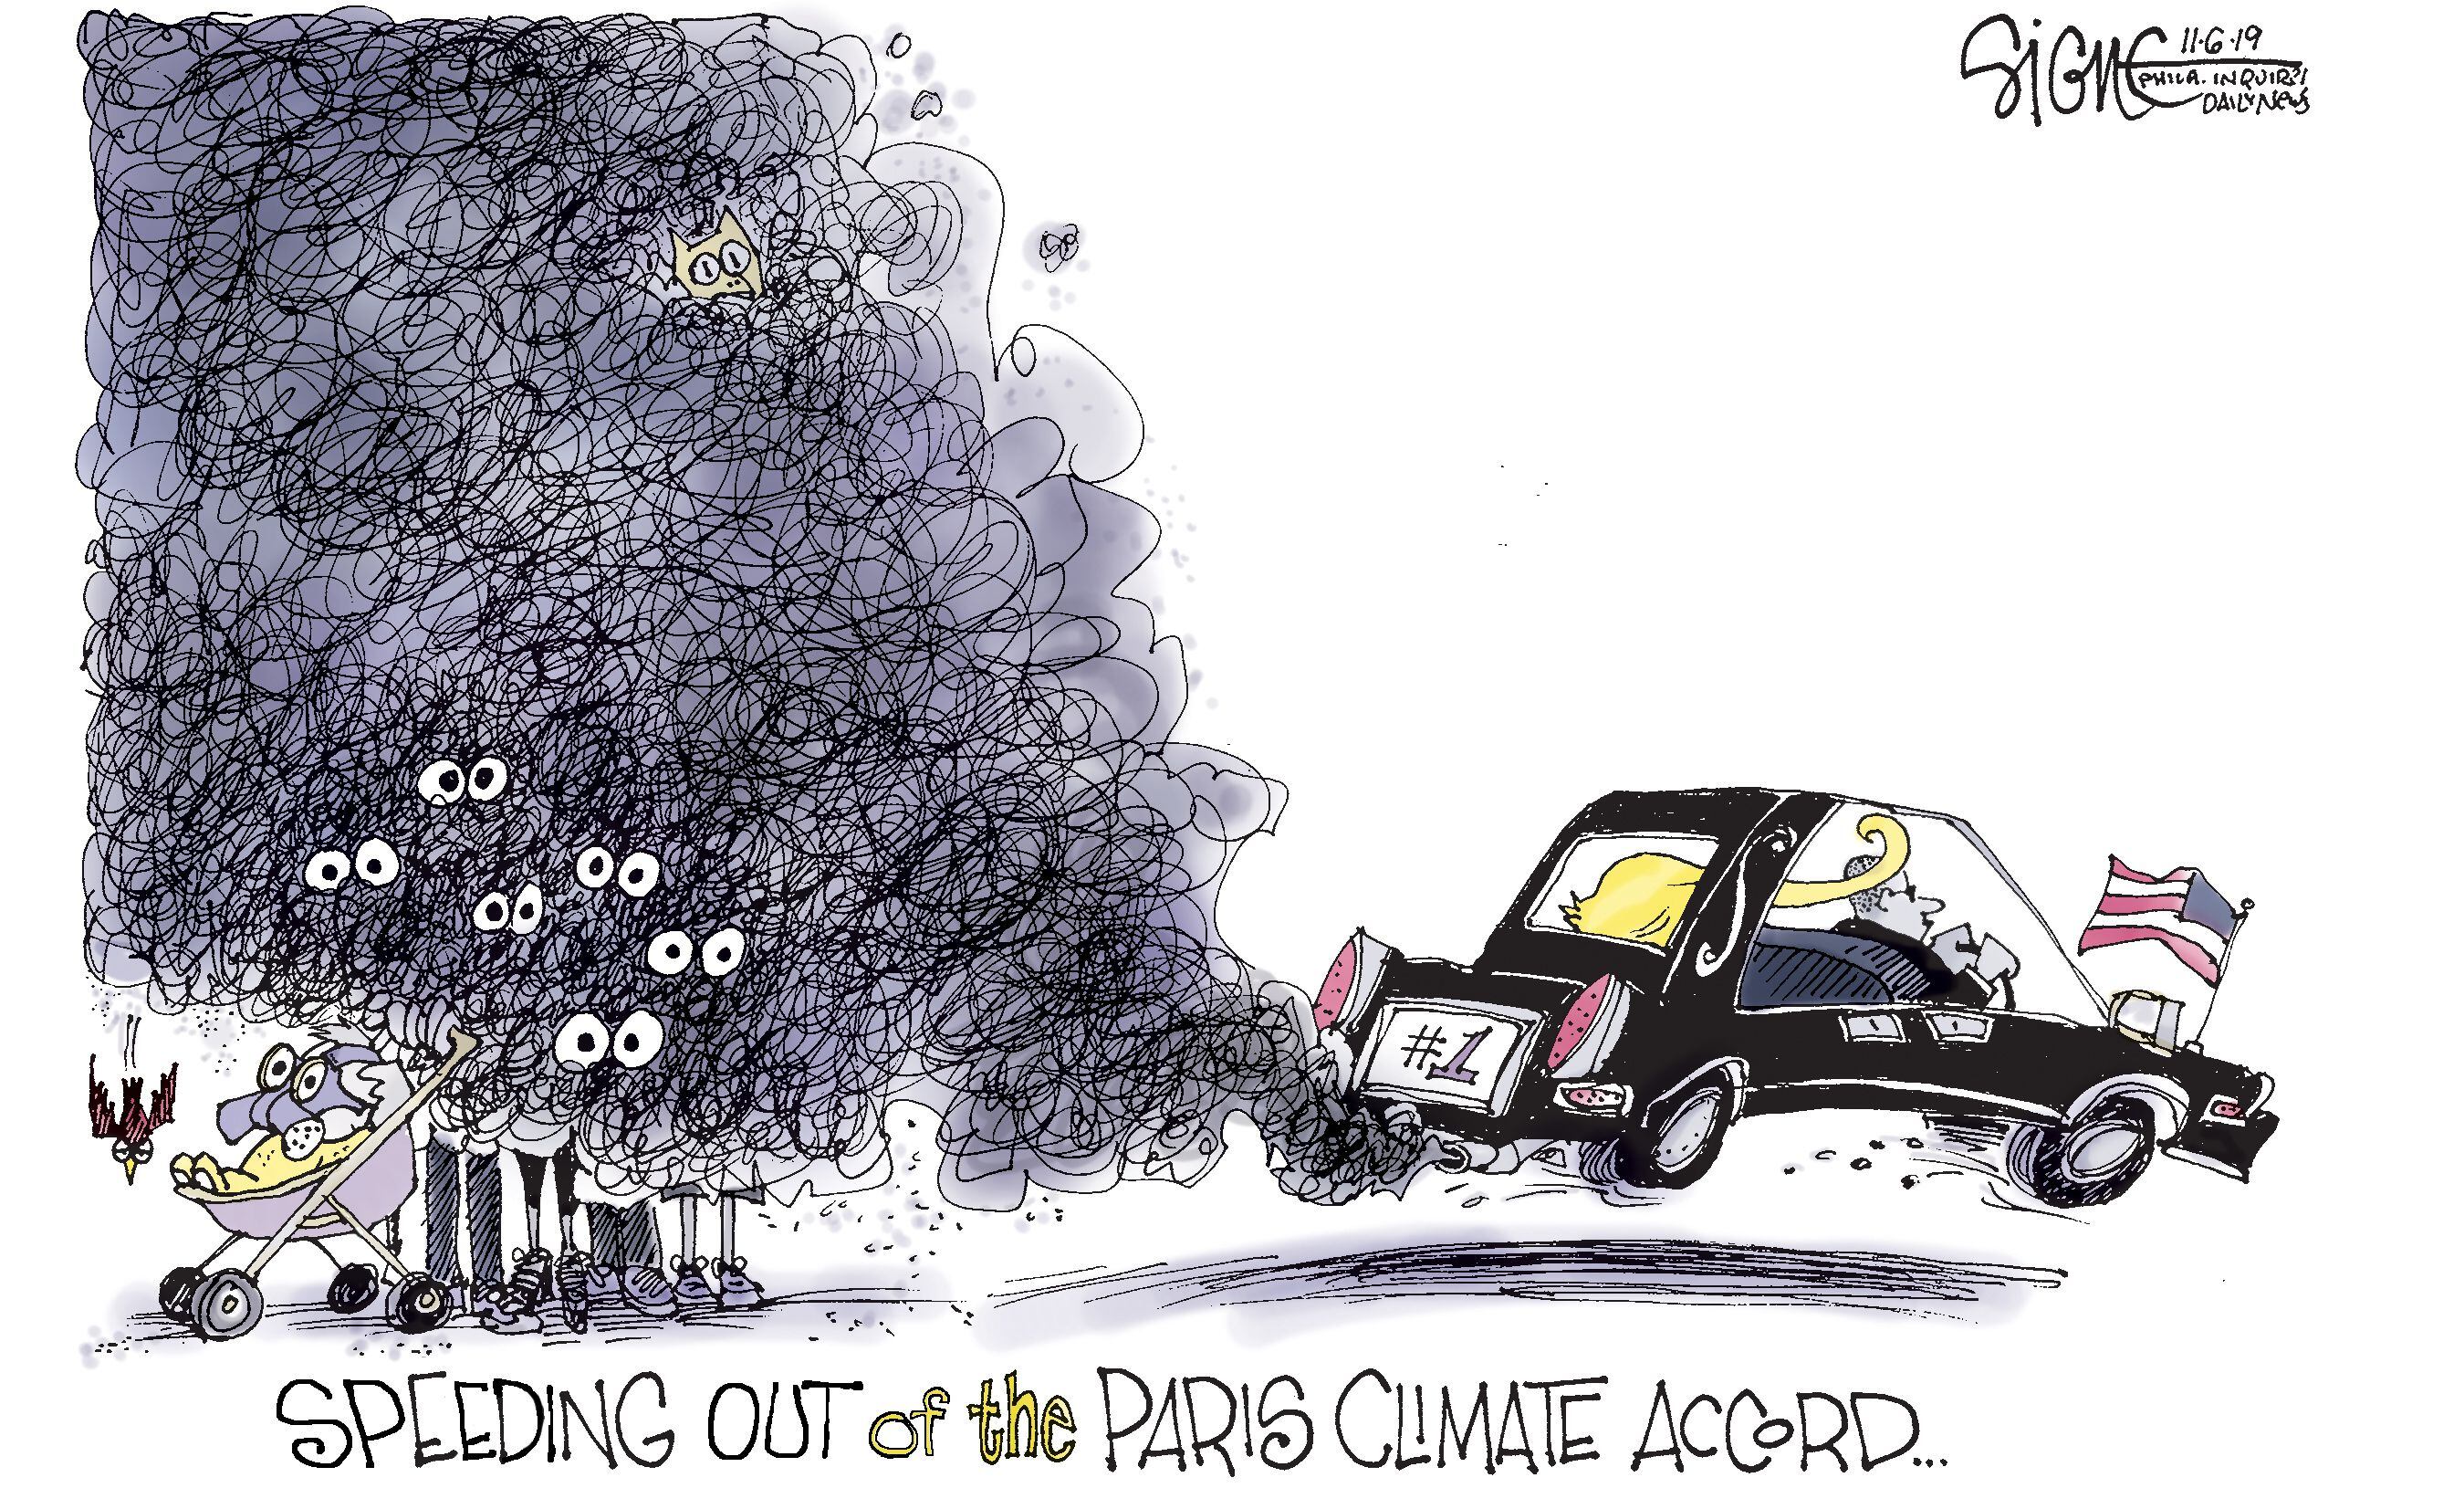 Political Cartoon: Trump speeds out of the Paris climate agreement